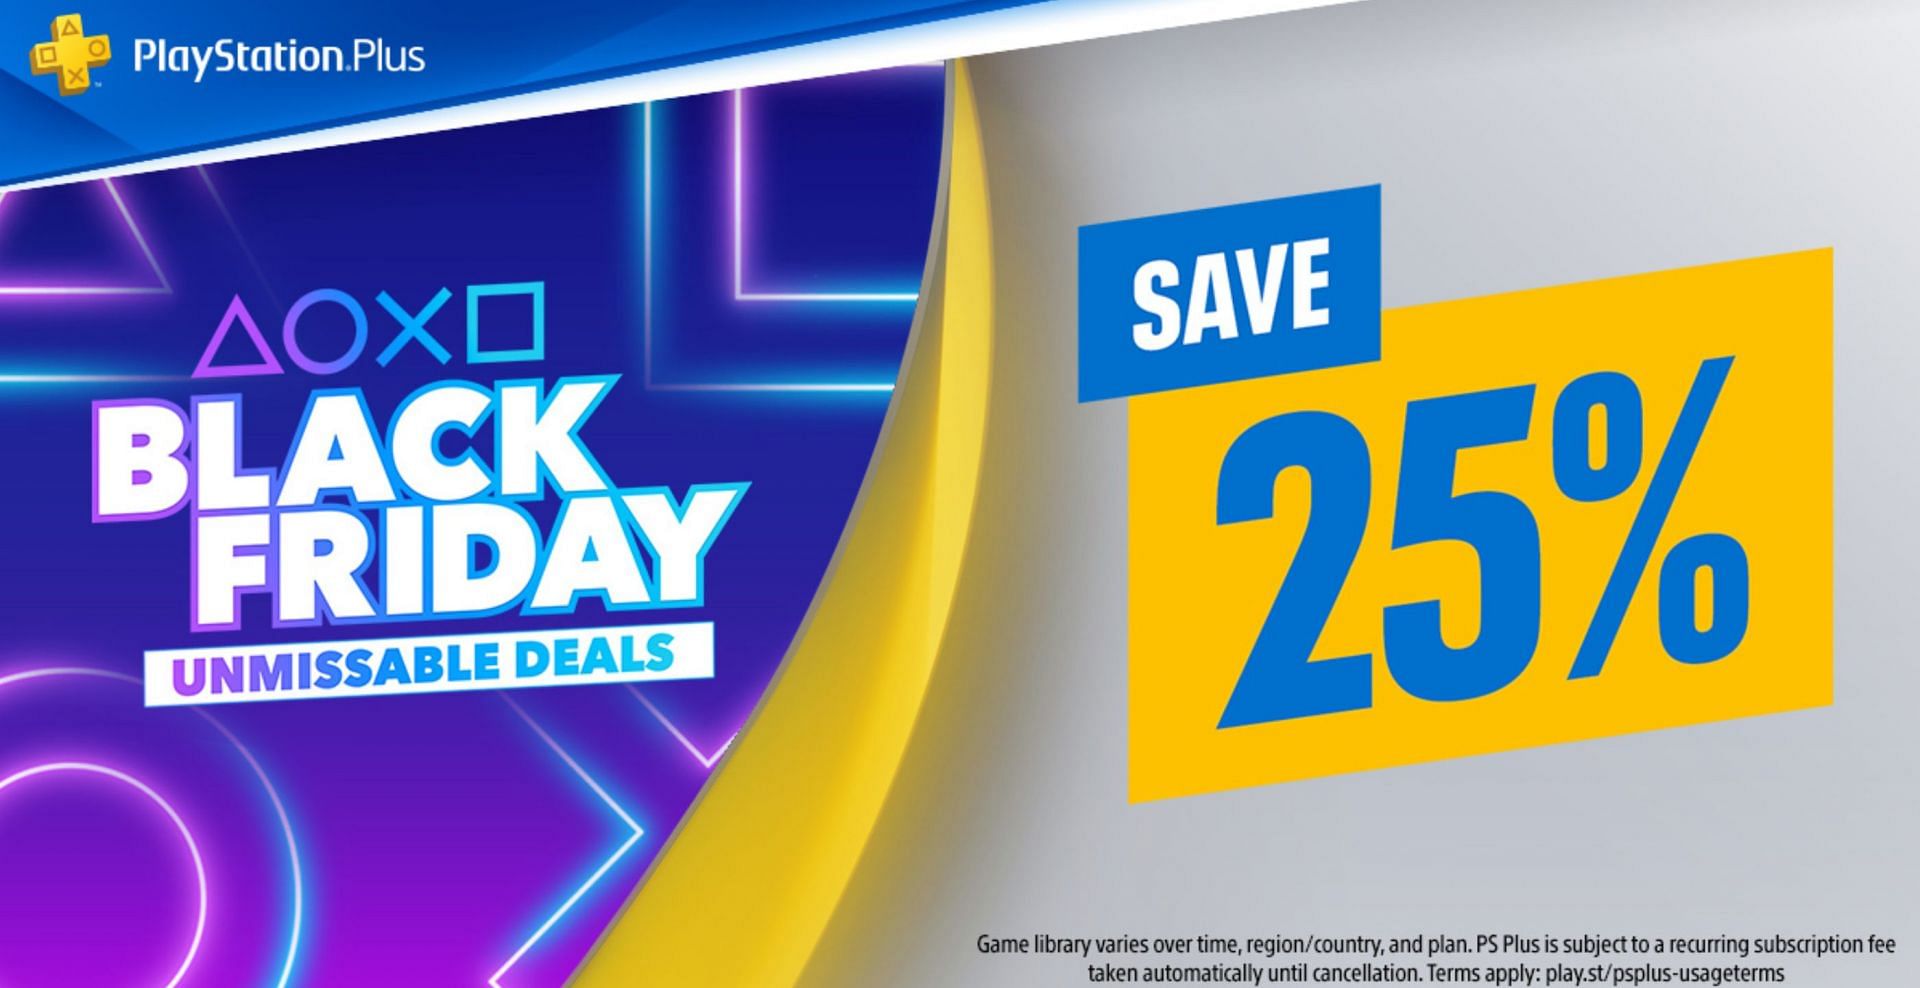 PS Plus Black Friday Sale: Start date, time, expected discounts, and more